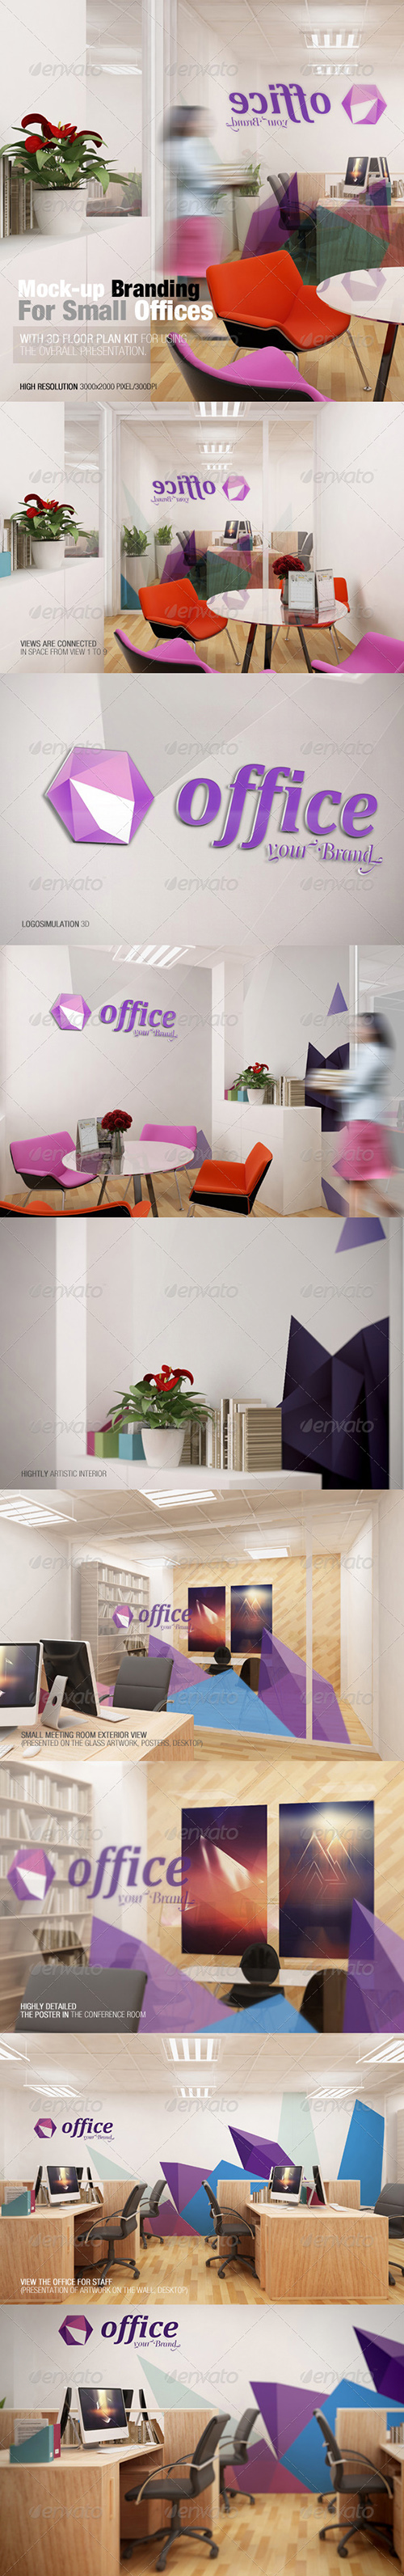 GraphicRiver - Mockup Branding For Small Offices 7688046